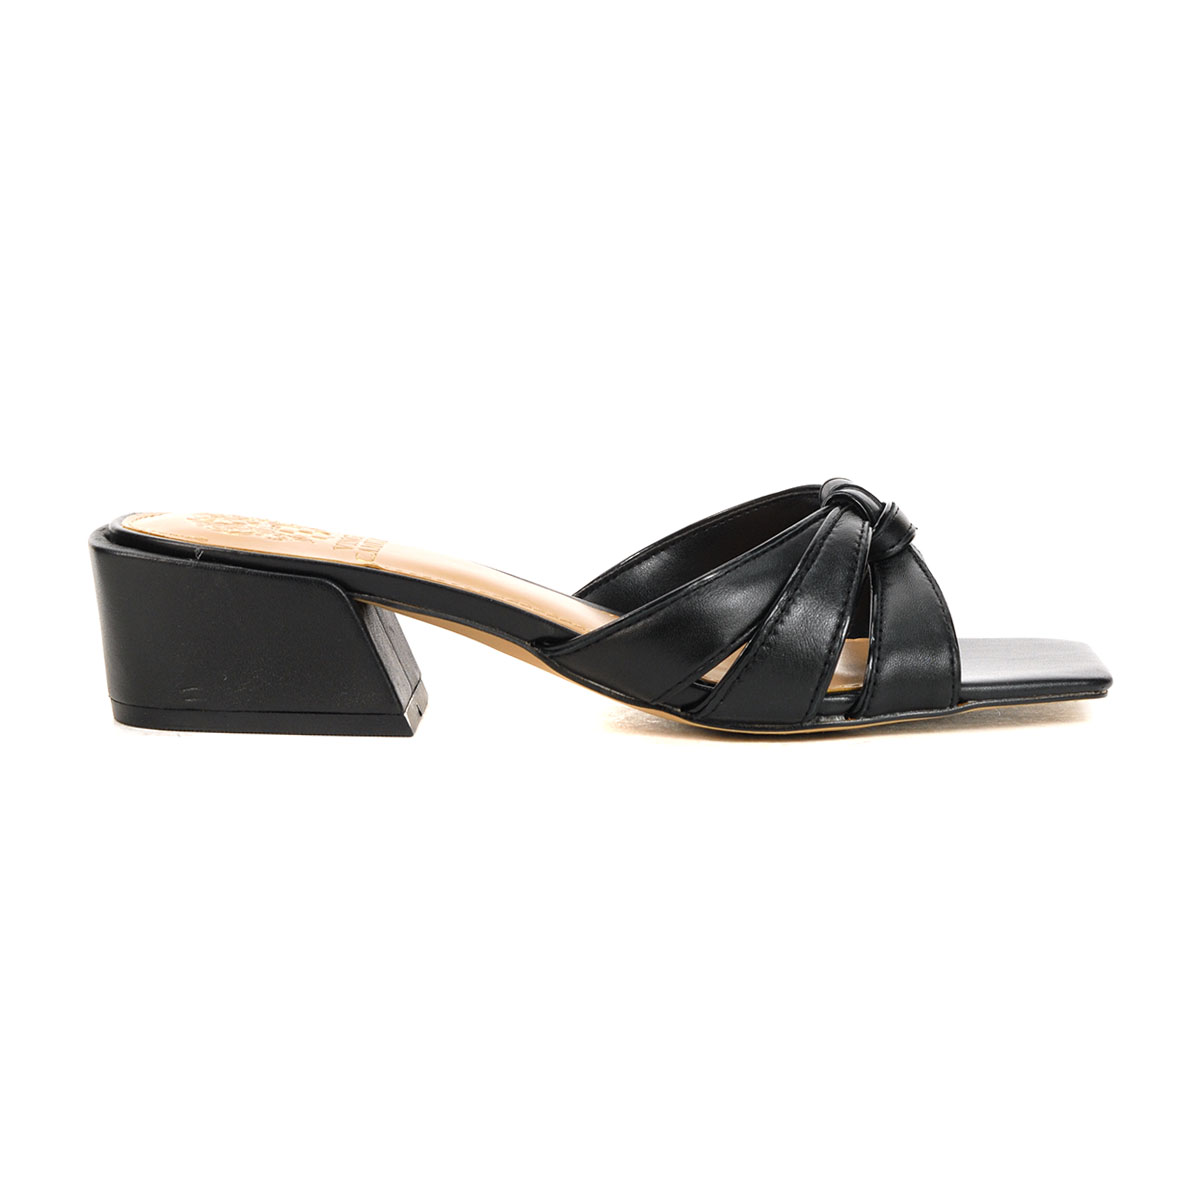 Vince Camuto Selaries Black Patent Leather Sandals - WOOKI.COM